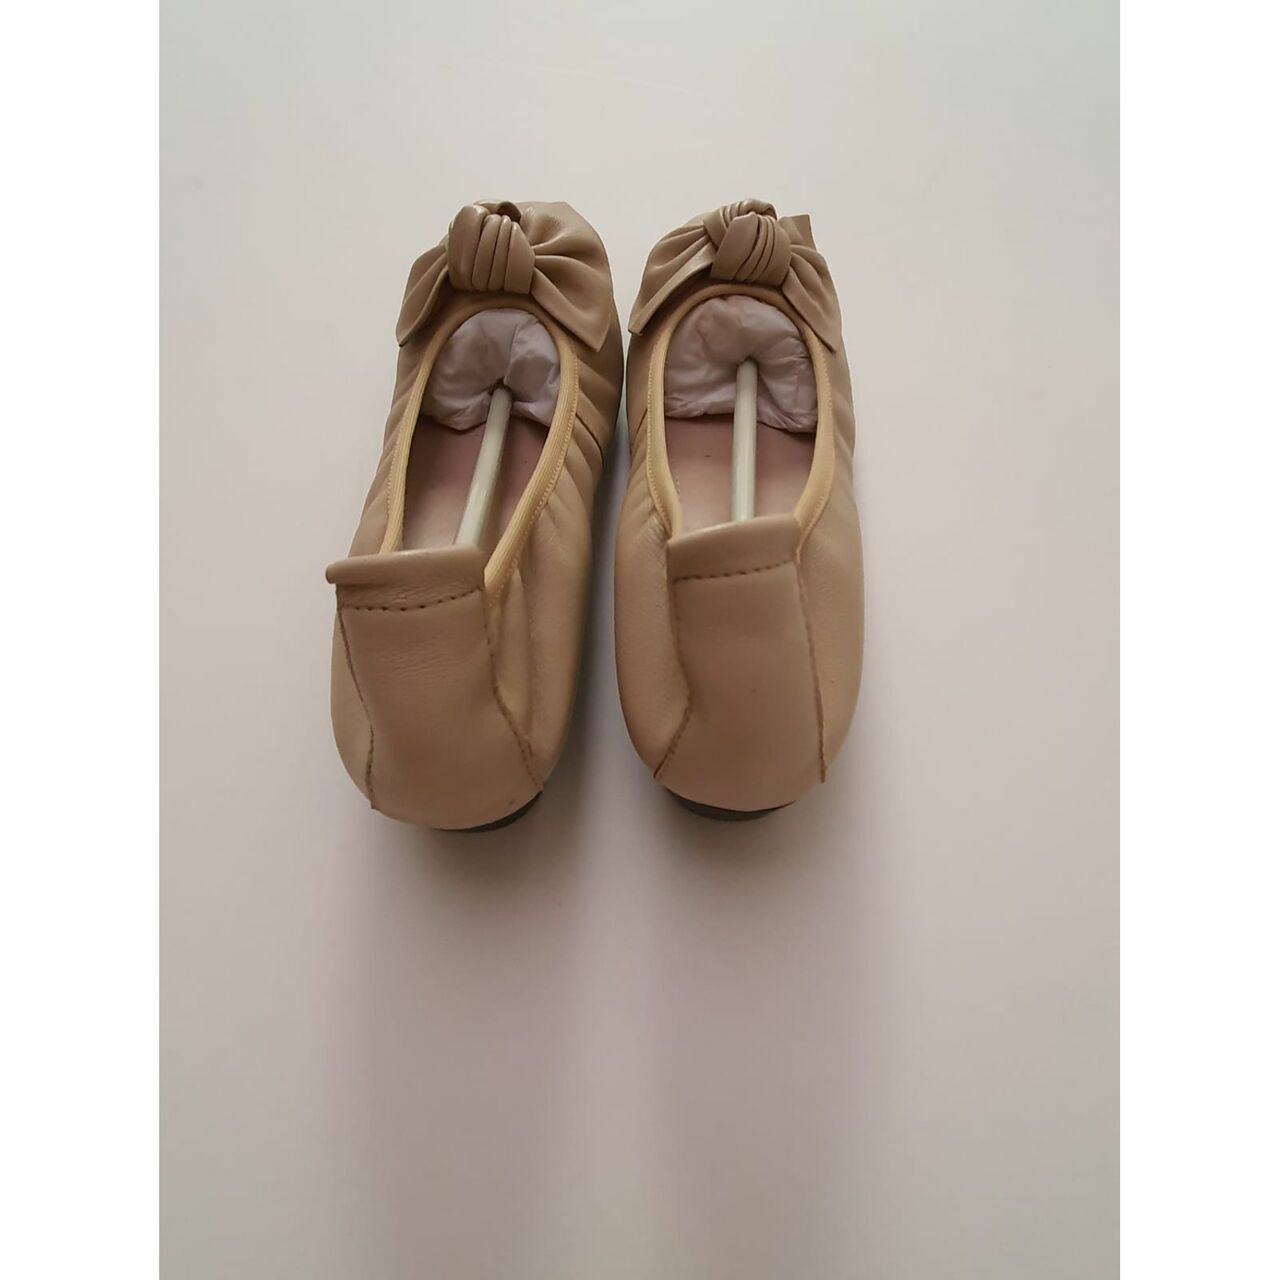 Staccato Beige Wedges